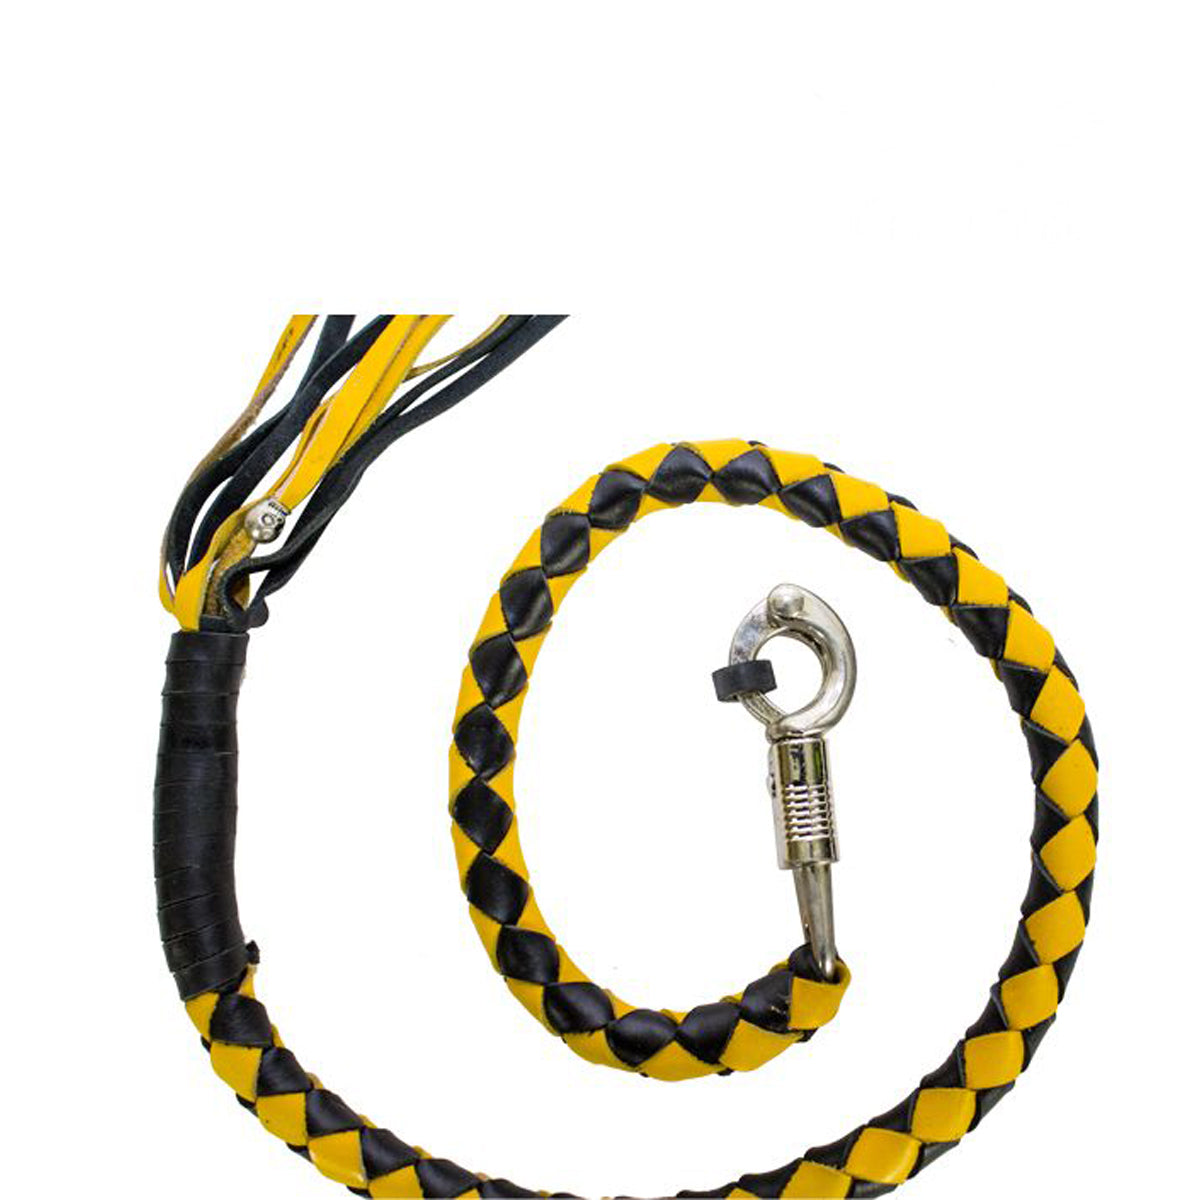 42" X 2" Hand-braided Naked Cowhide Leather Get Back Whip - Black/Yellow